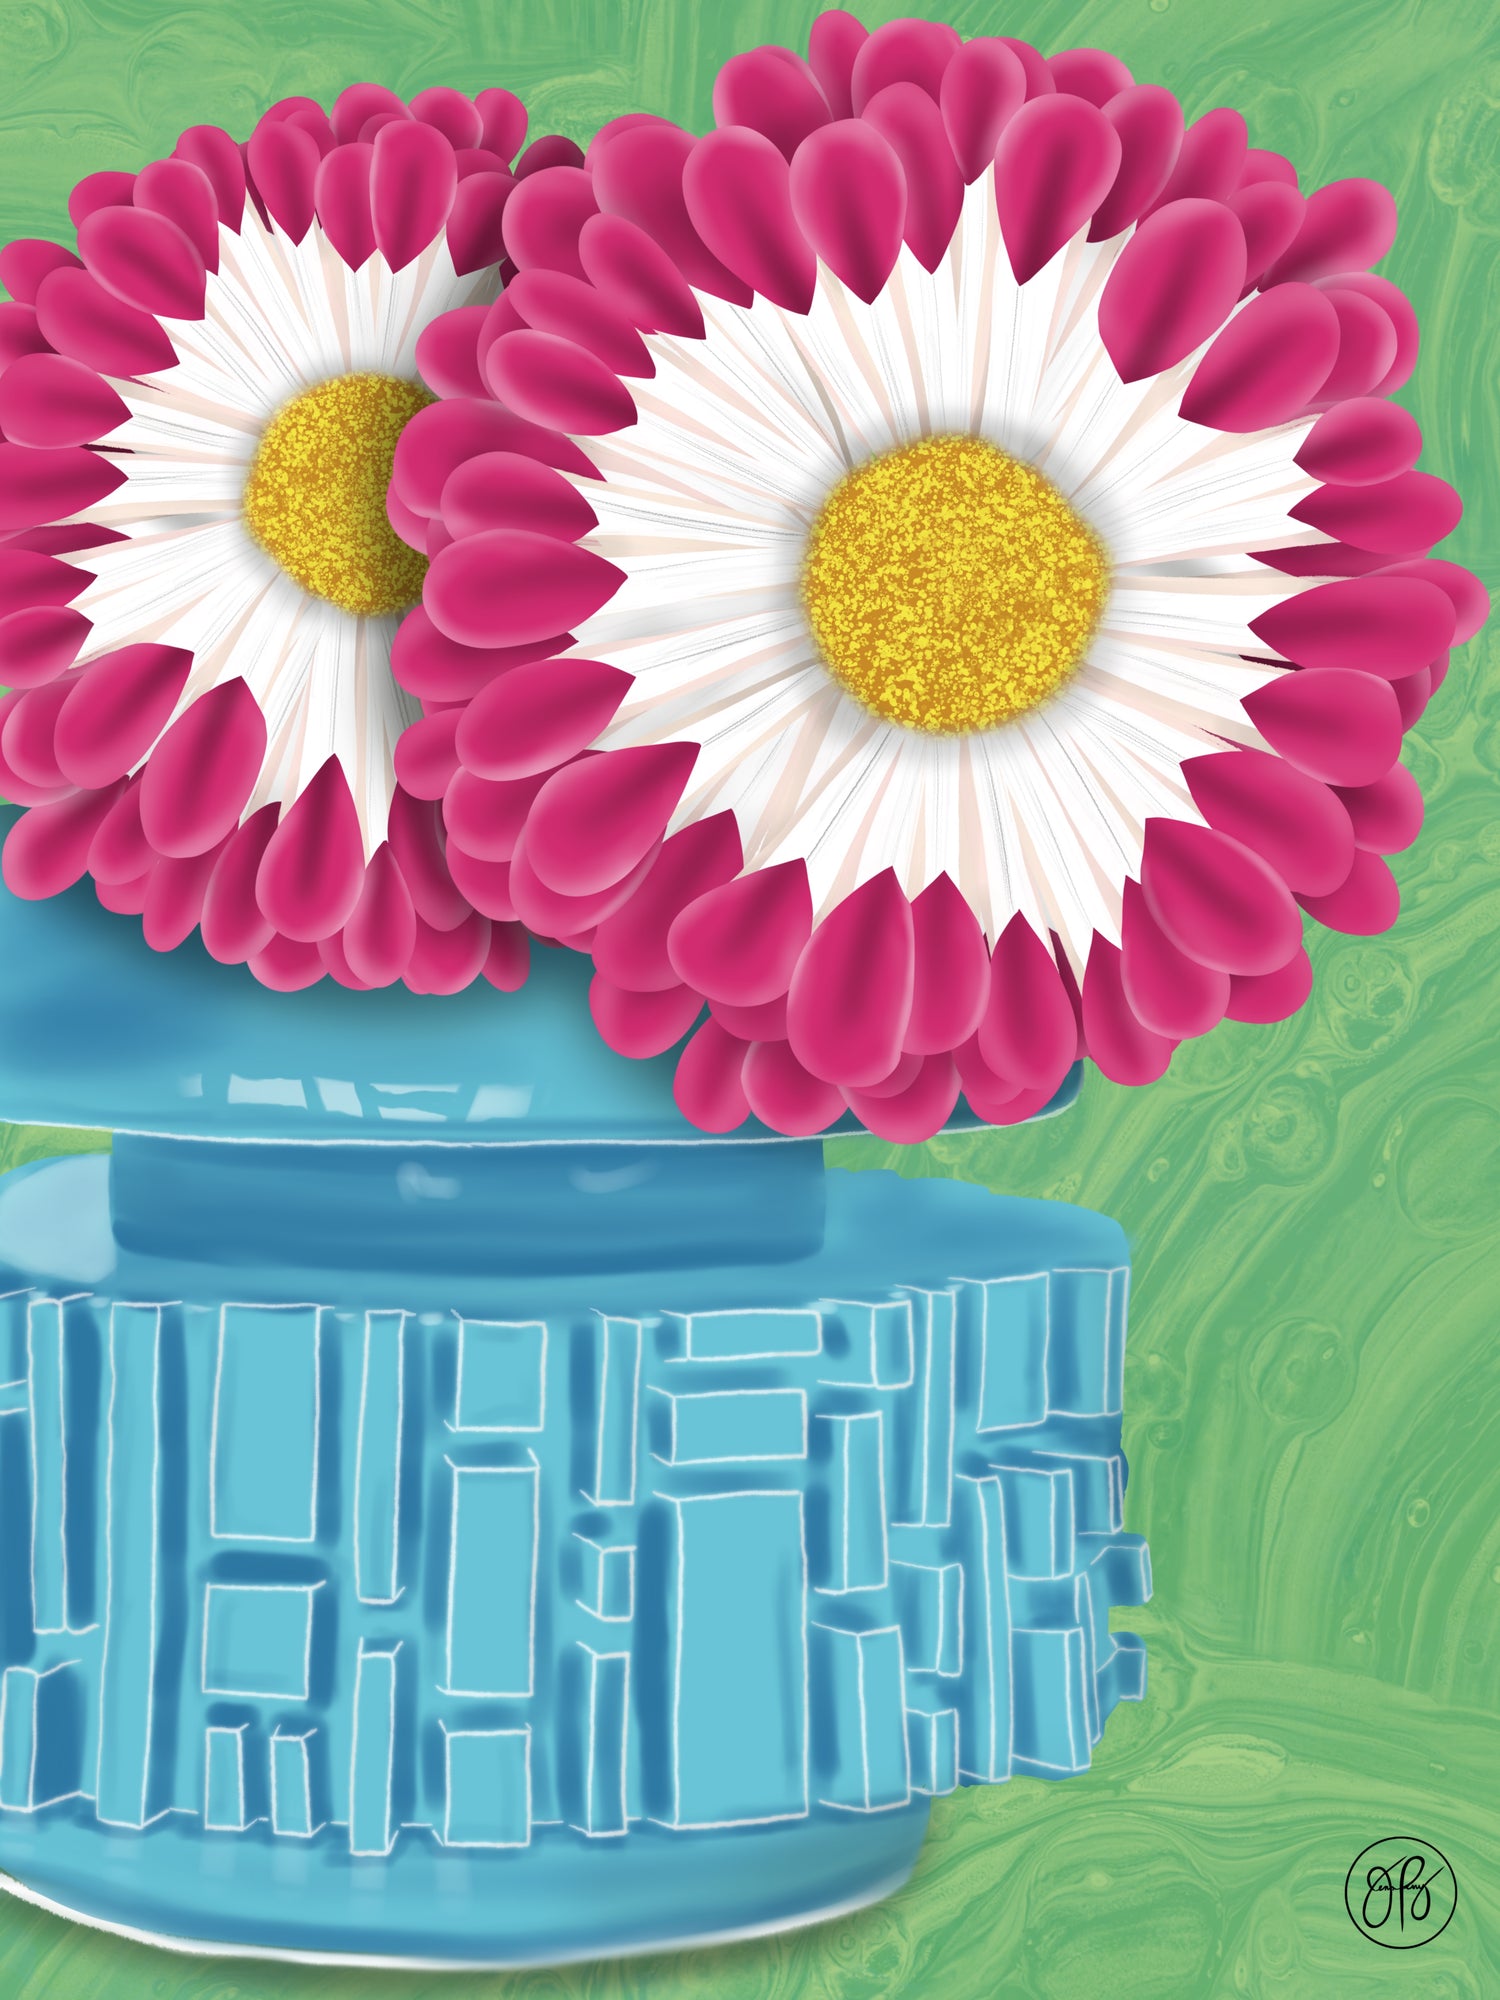 Vibrant painting of chrysanthemums in a blue brutalist pot - titled Mum’s the Word